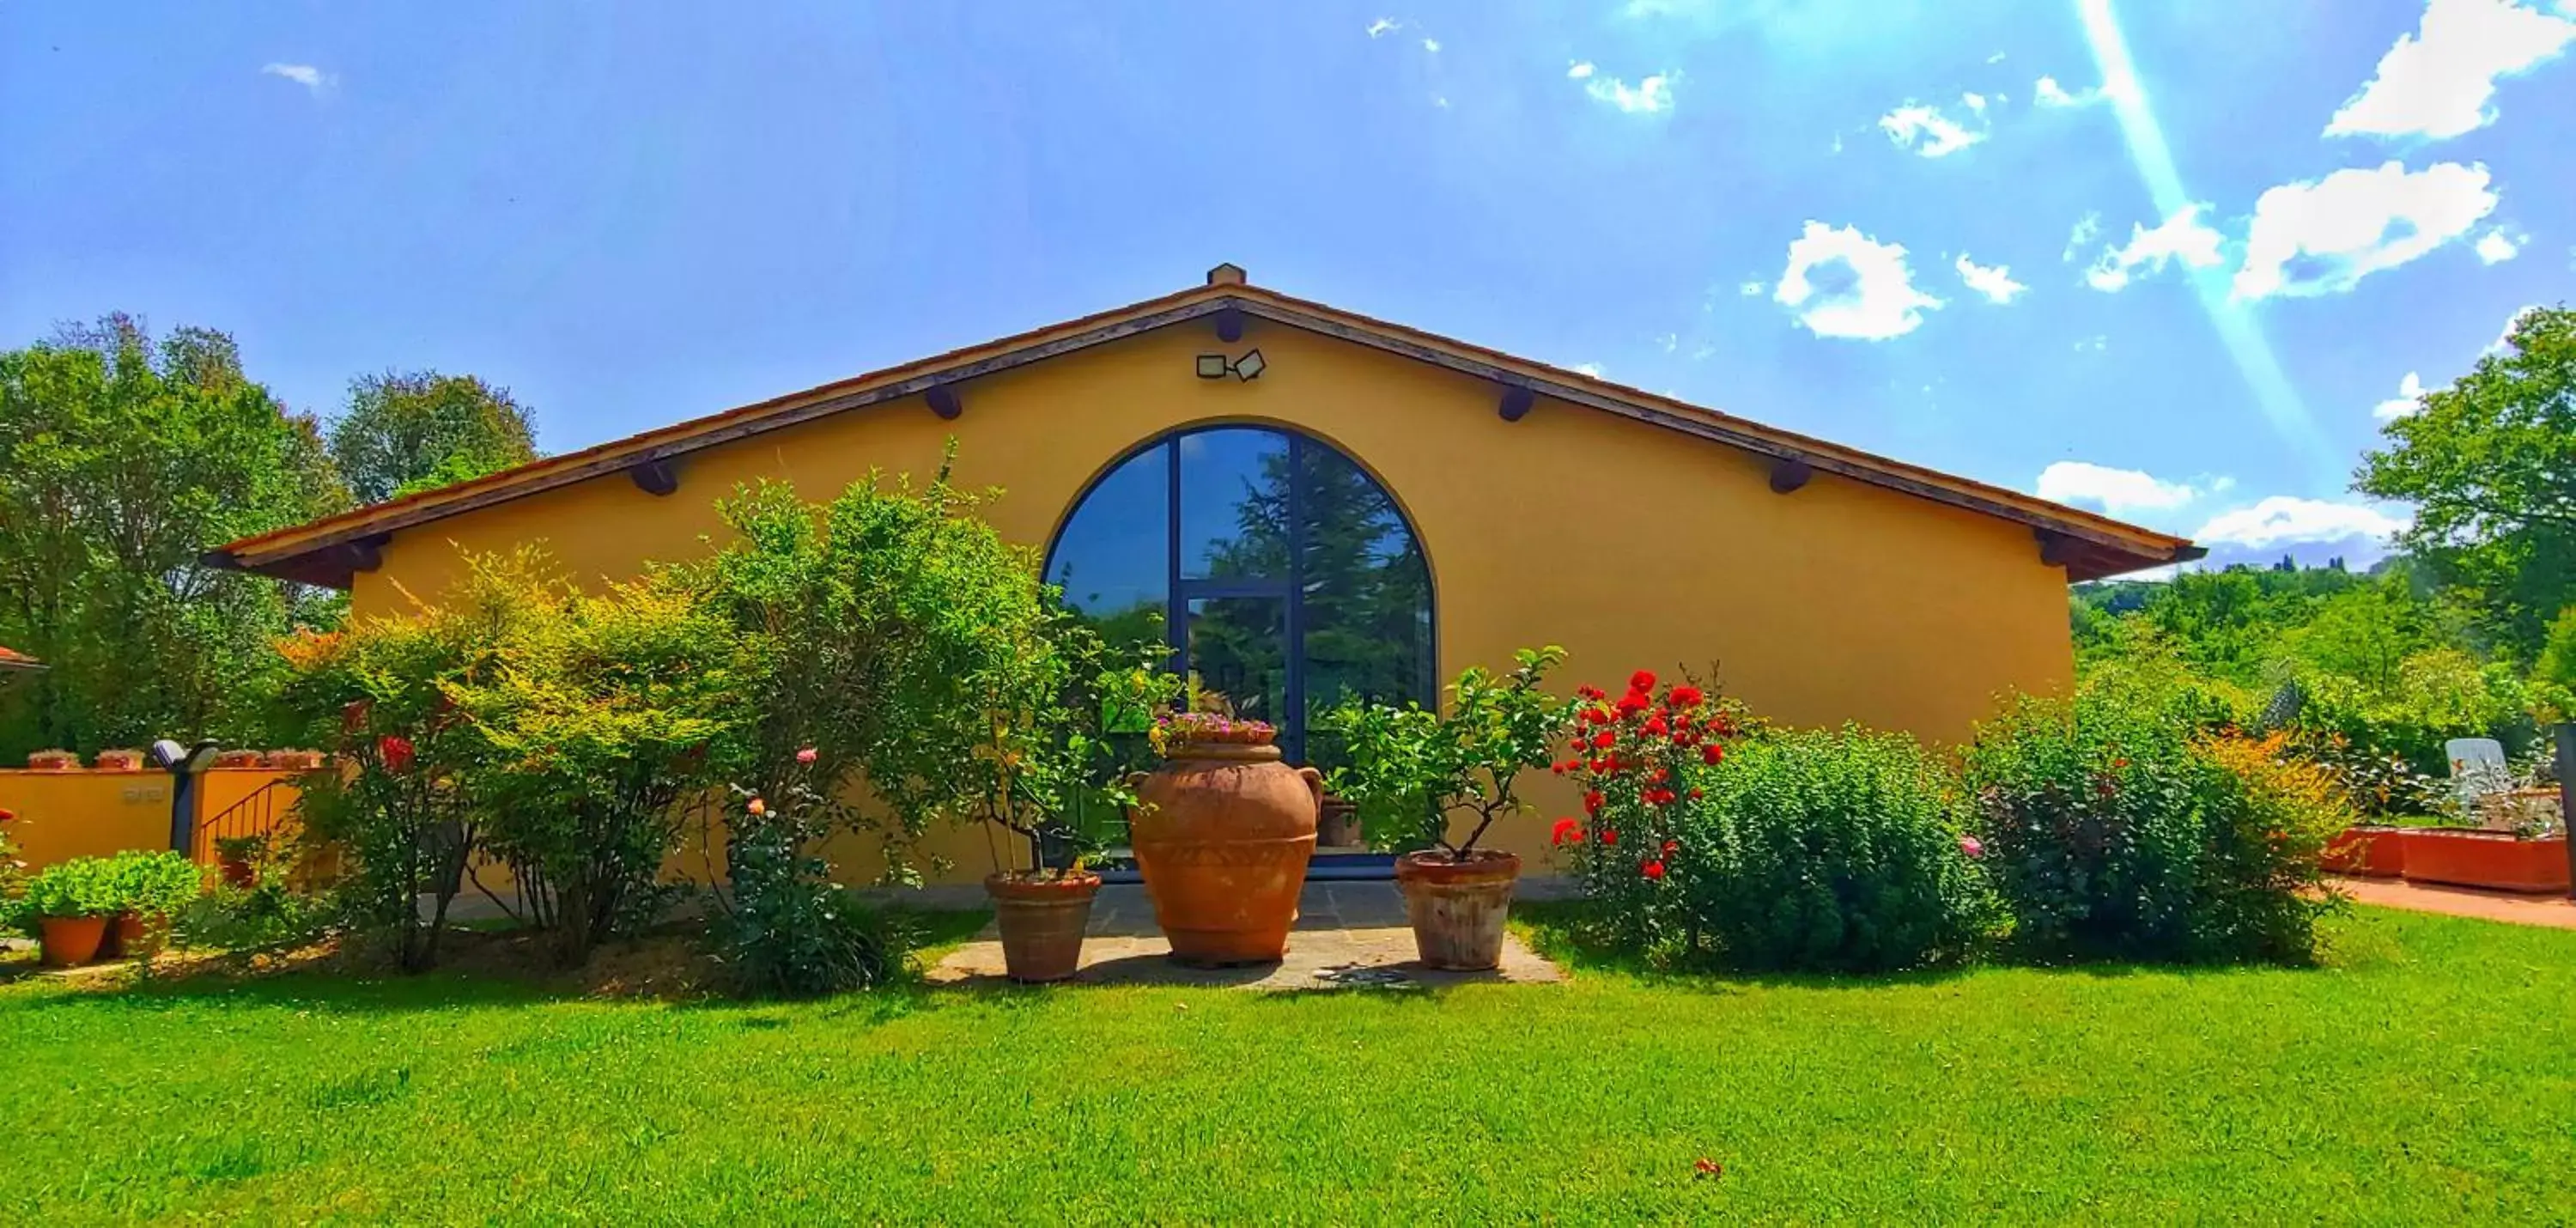 Property Building in Torrebianca Tuscany